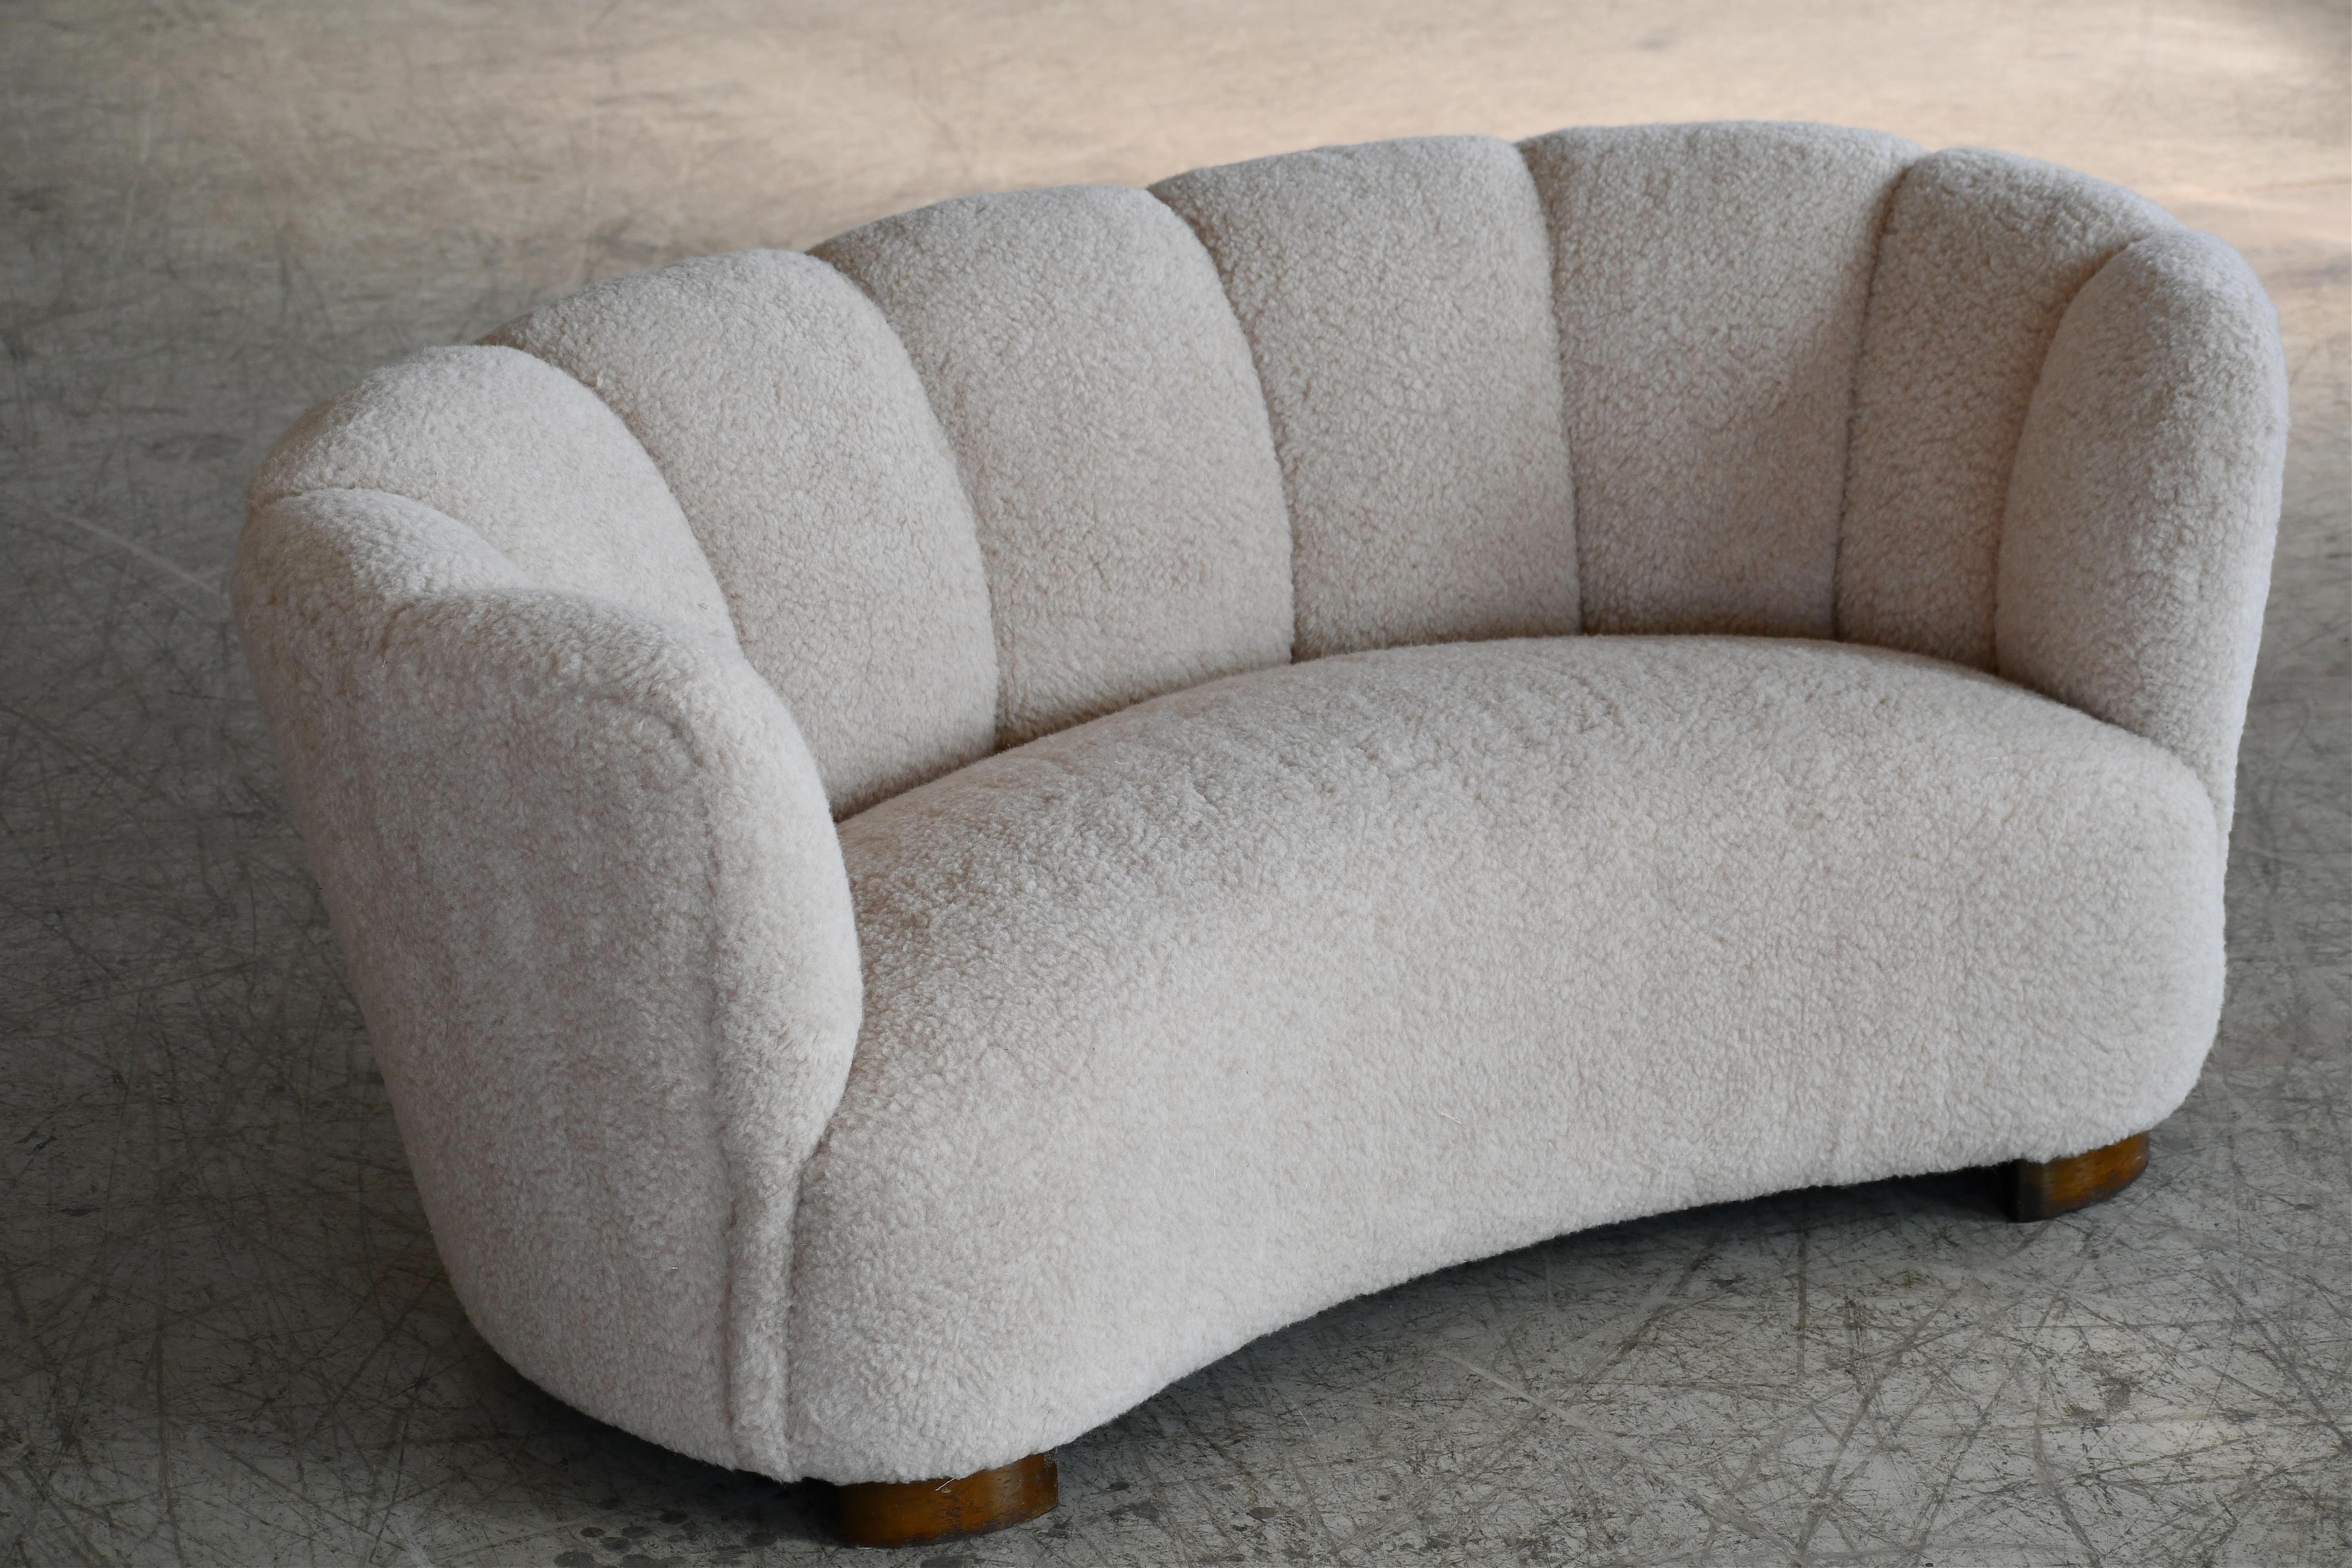 Danish 1940's Banana Shaped Curved Loveseat or Sofa Covered in Beige Lambswool 4